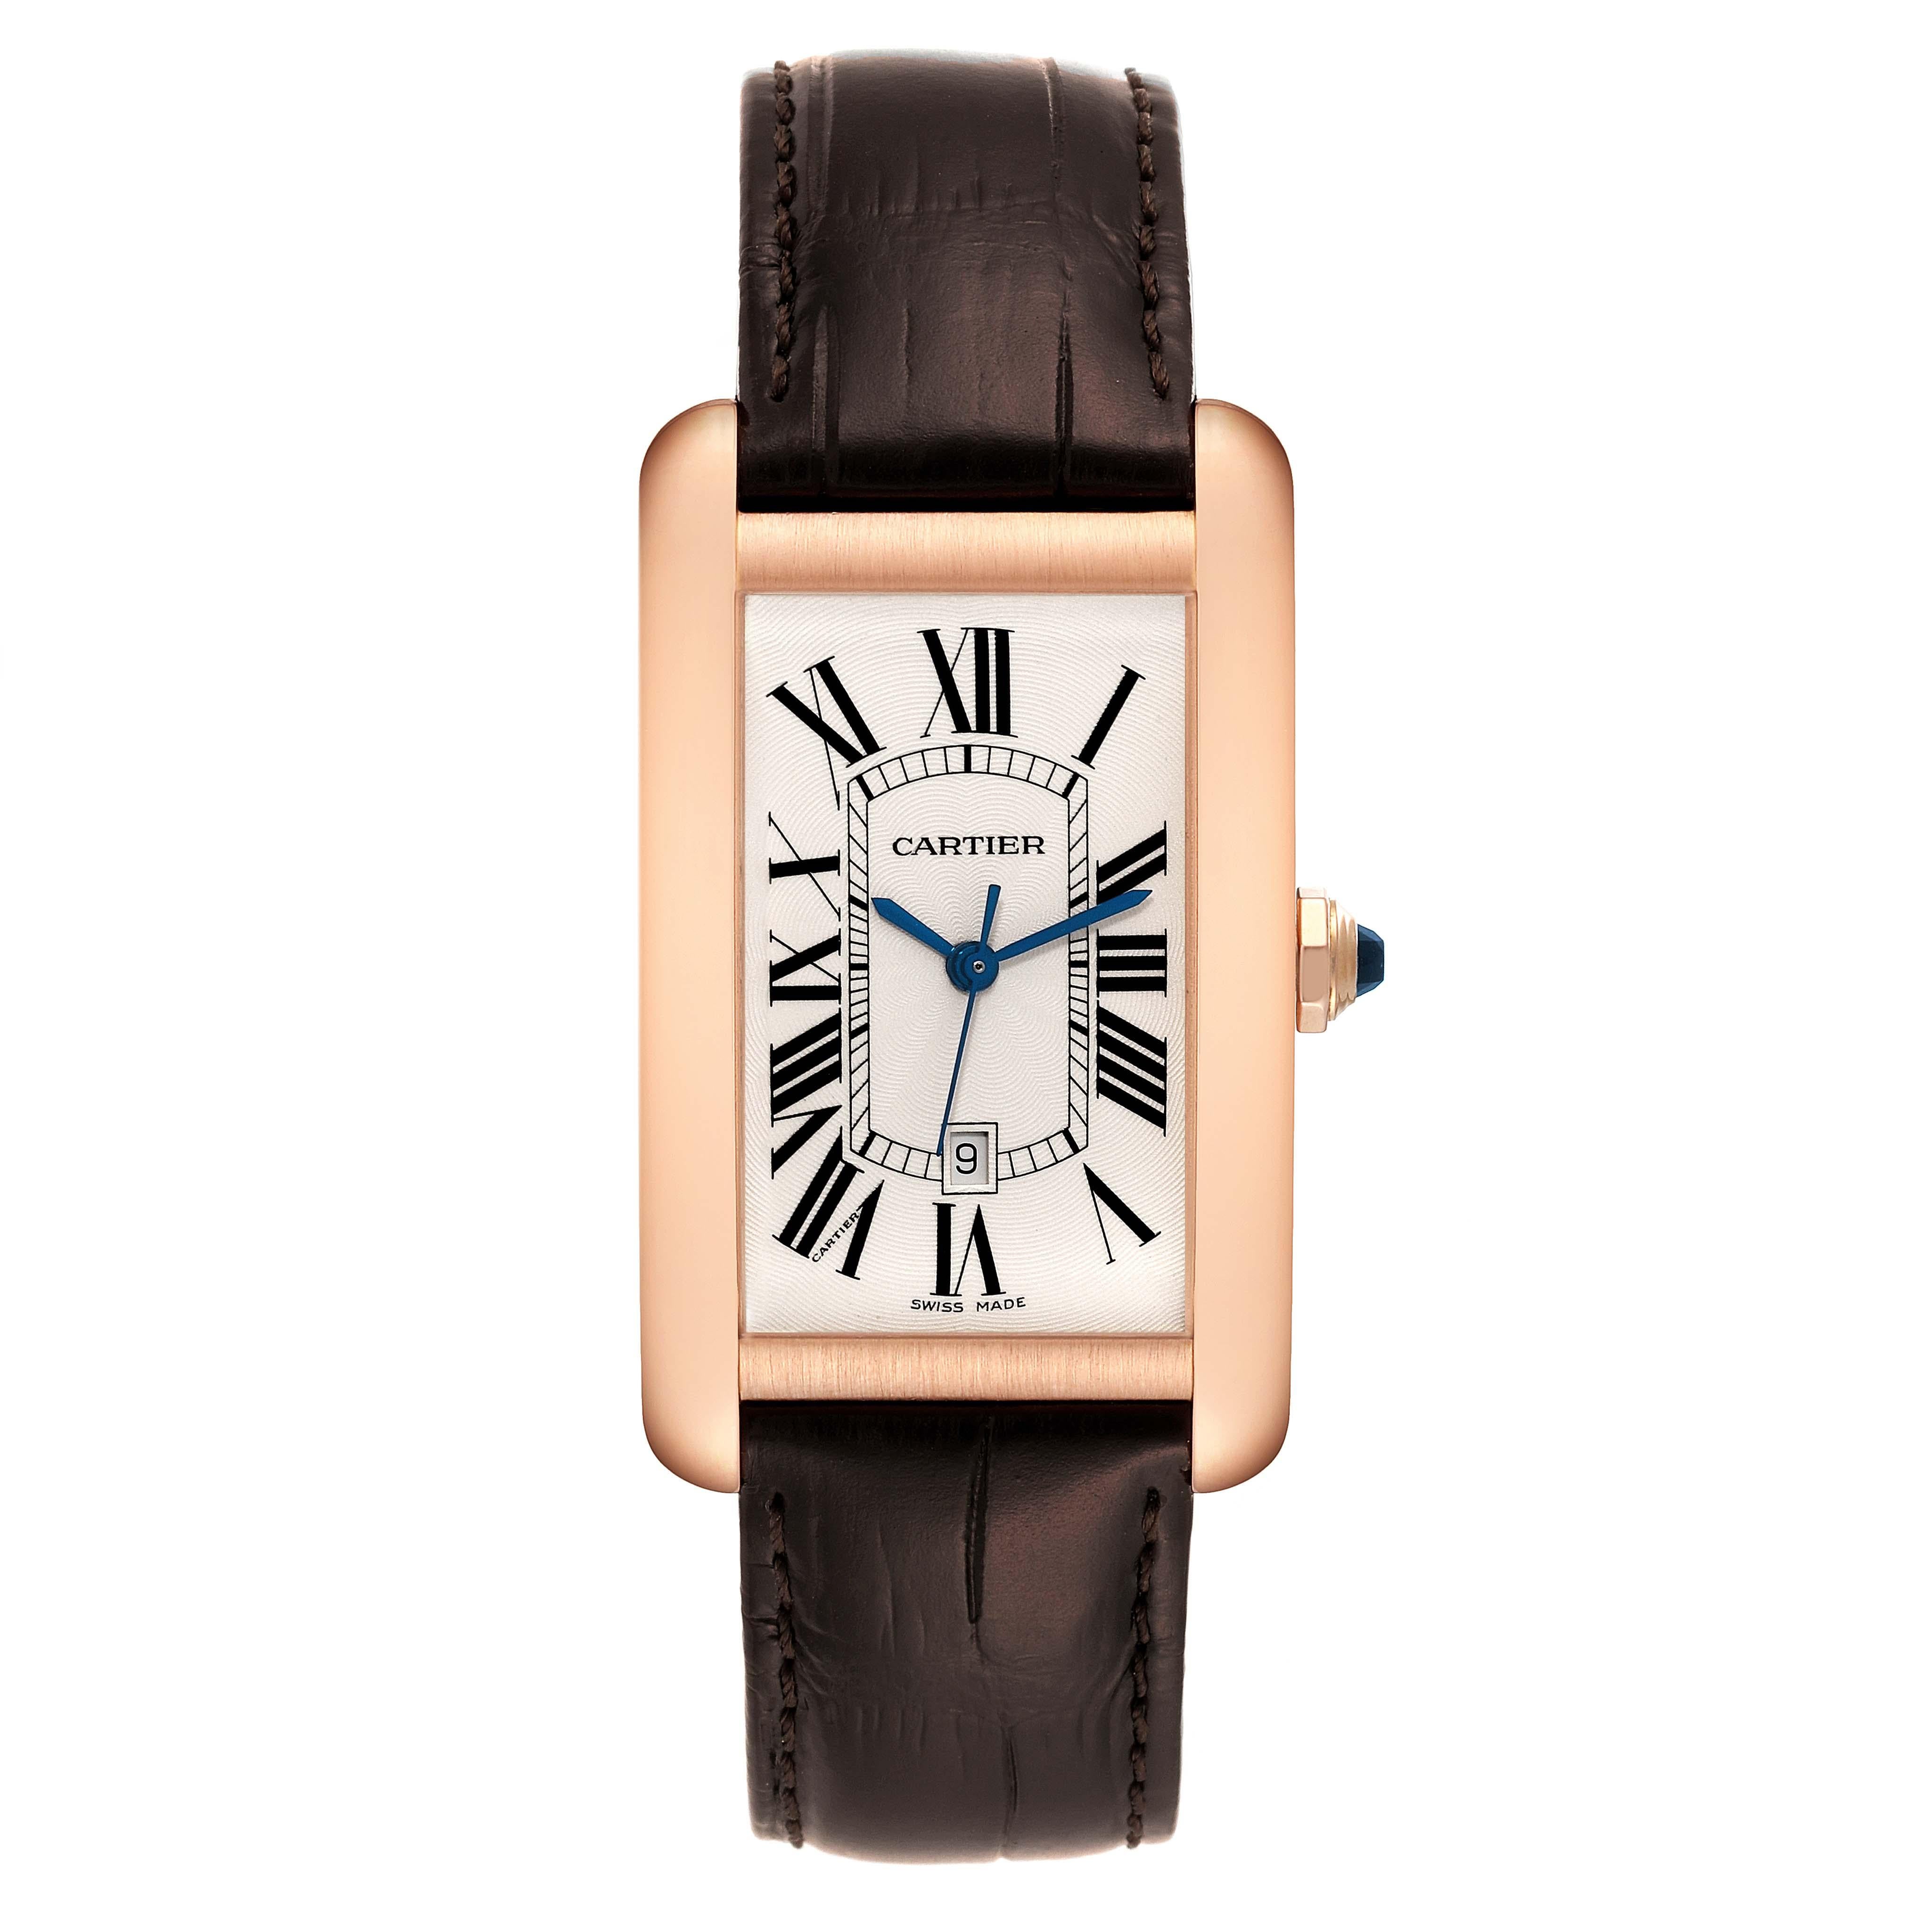 Cartier Tank Americaine Large 18K Rose Gold Mens Watch W2609156. Automatic self-winding movement. 18K rose gold case 26.6 x 45.1 mm. Circular grained crown set with faceted blue sapphire. . Mineral crystal. Silvered guiloche dial with black roman